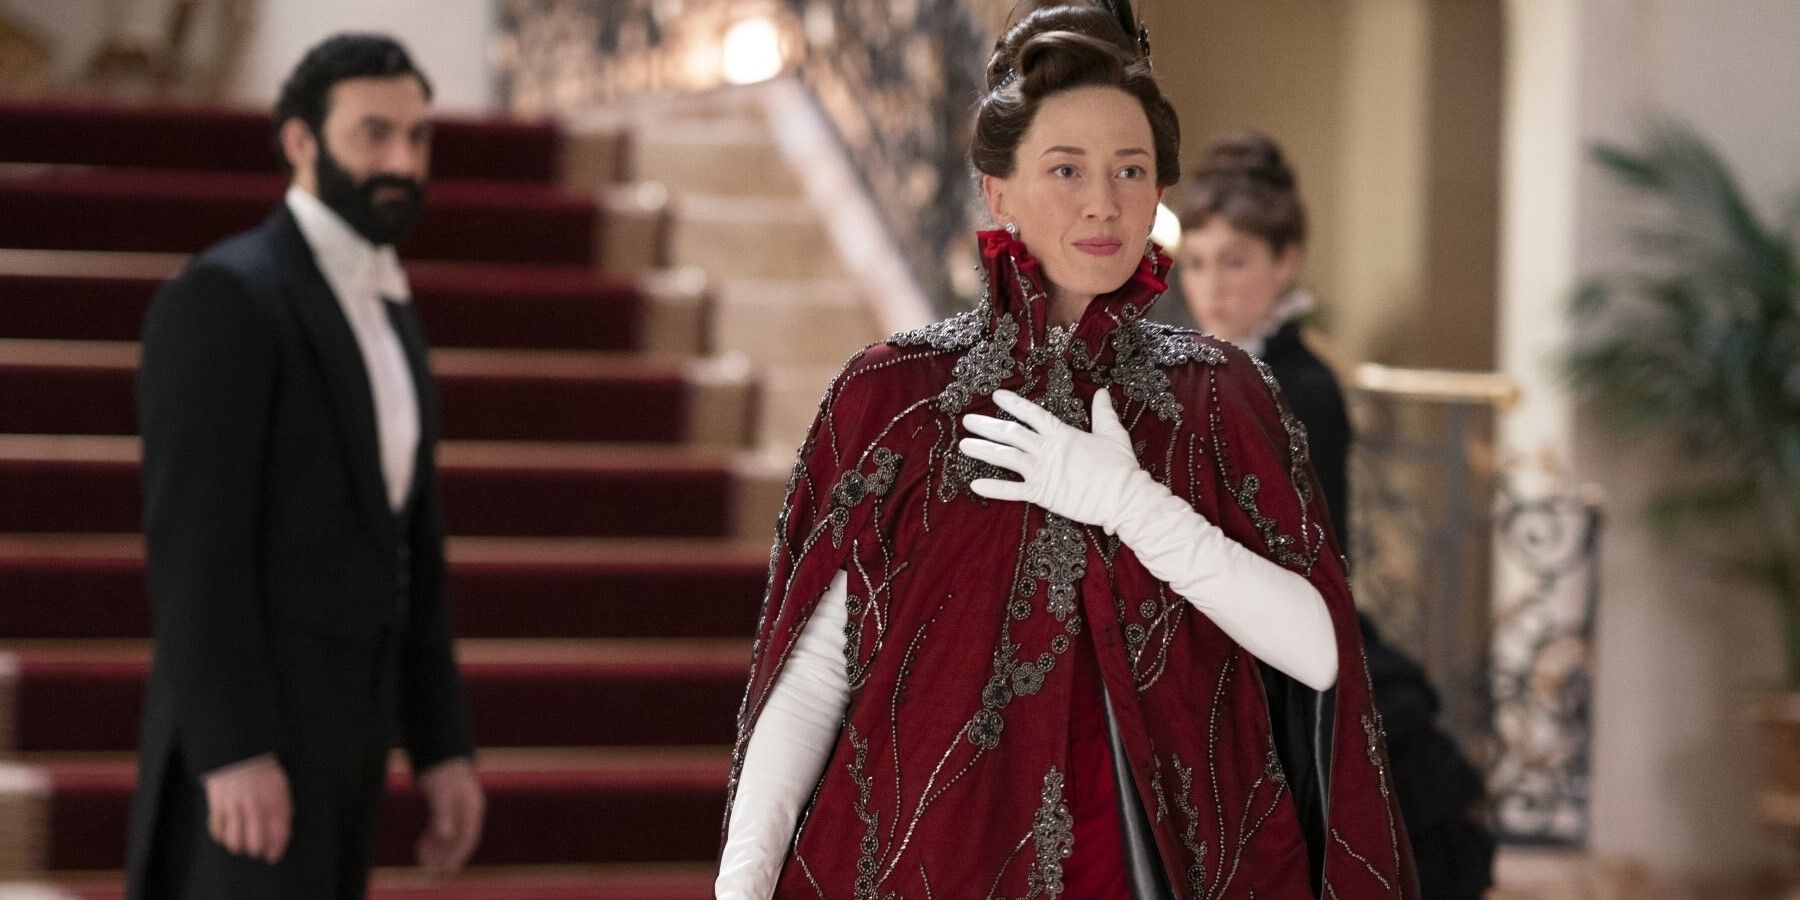 Carrie Coon as Bertha wearing an embroidered red cloak in The Gilded Age